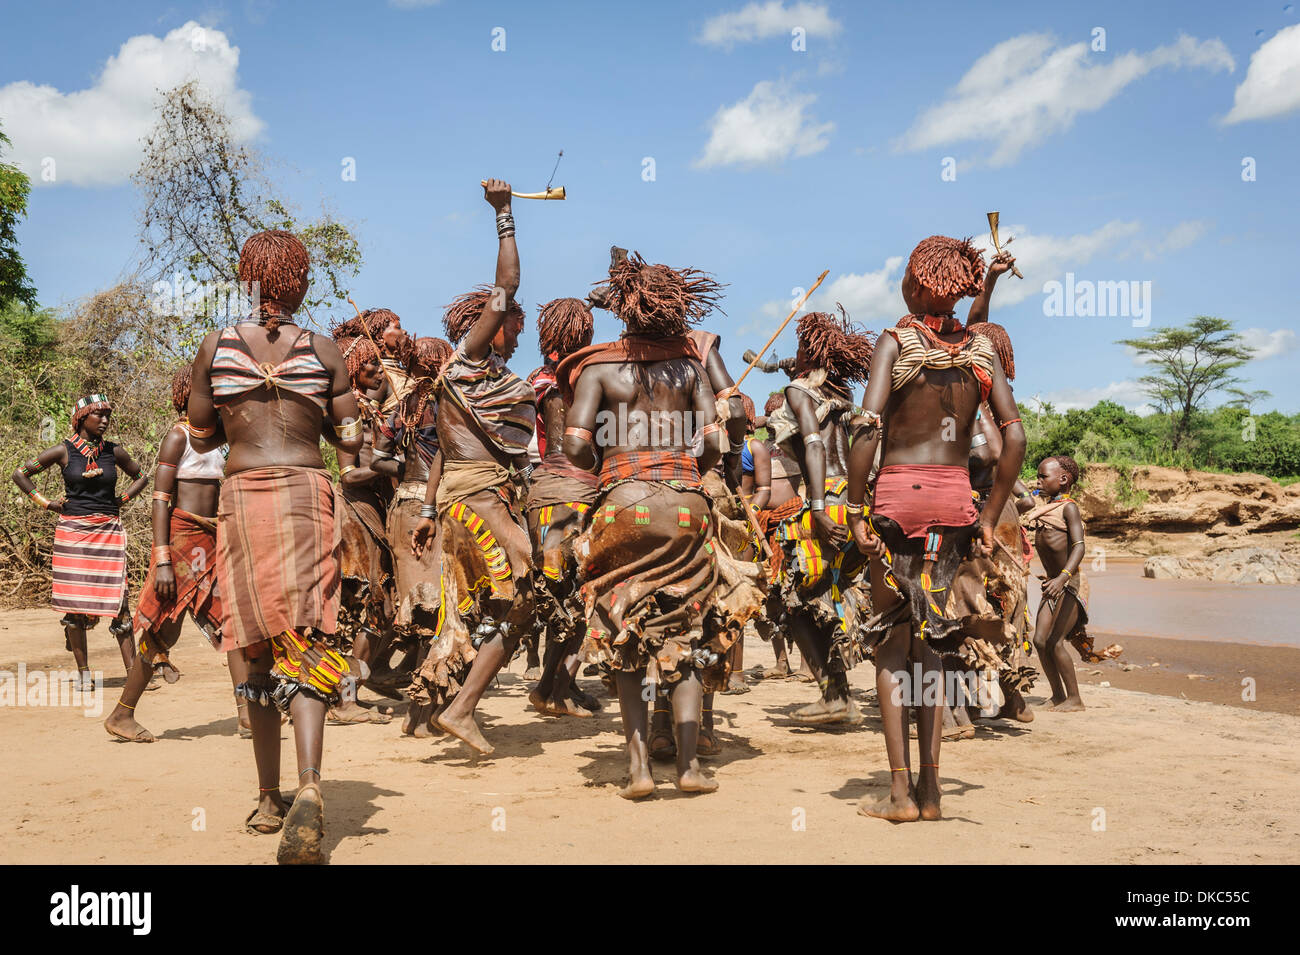 Women dancing during a bull jumping ceremony. A rite of passage from boys to men. Hamer tribe, Omo valley, Ethiopia Stock Photo